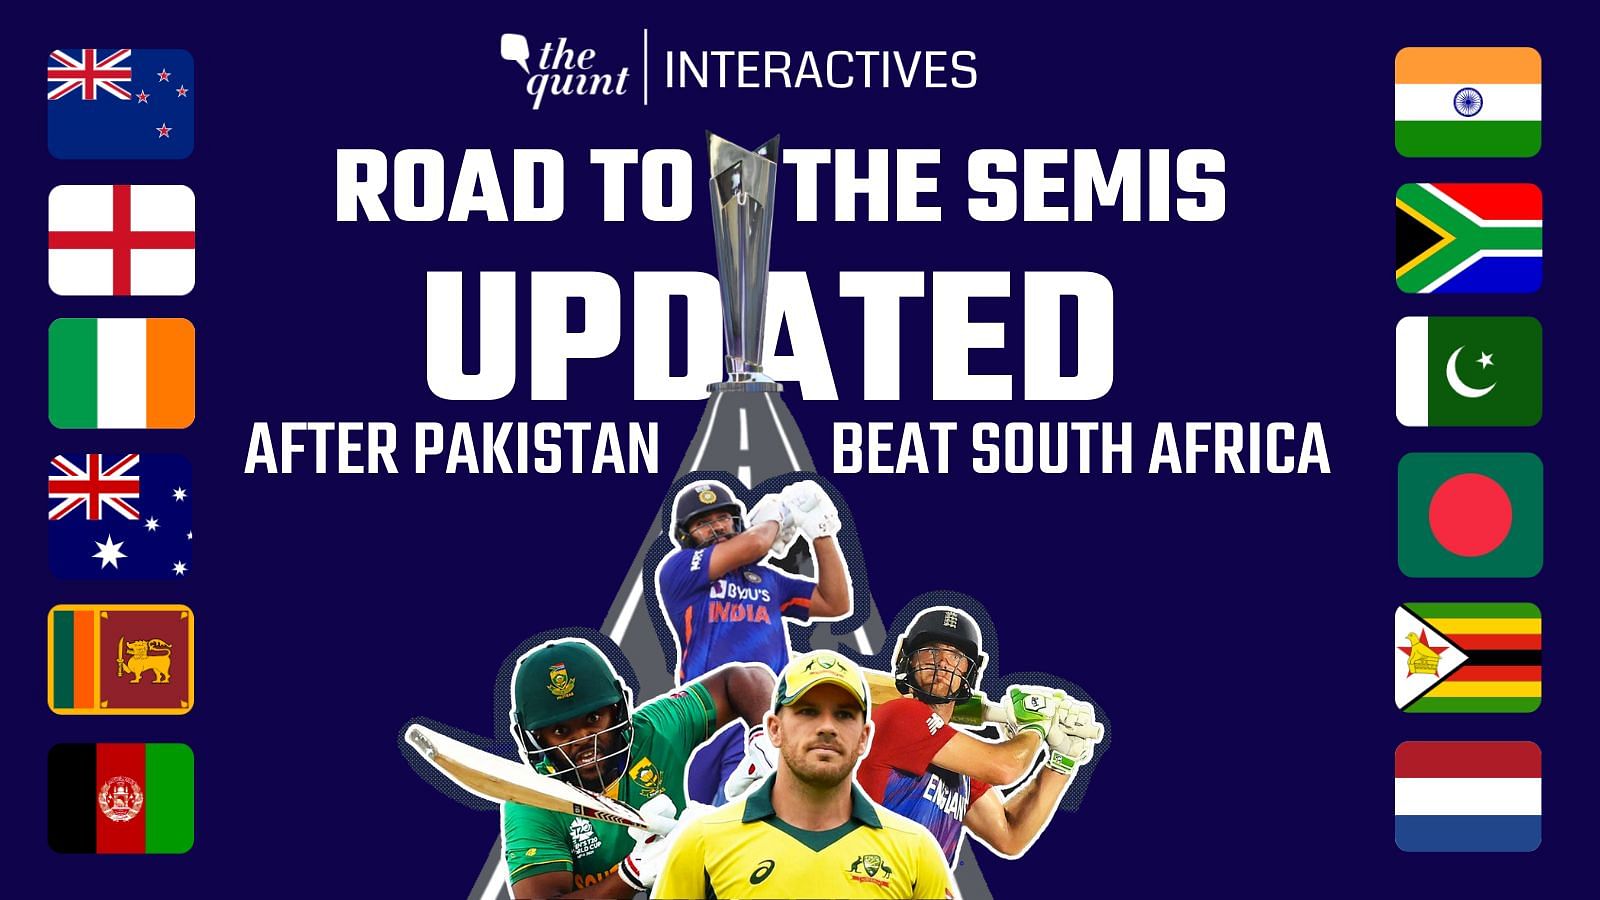 <div class="paragraphs"><p>Here is the one-stop semifinals scenario explainer for Group 2 (India's group) of the Men's T20 Cricket World Cup.</p></div>